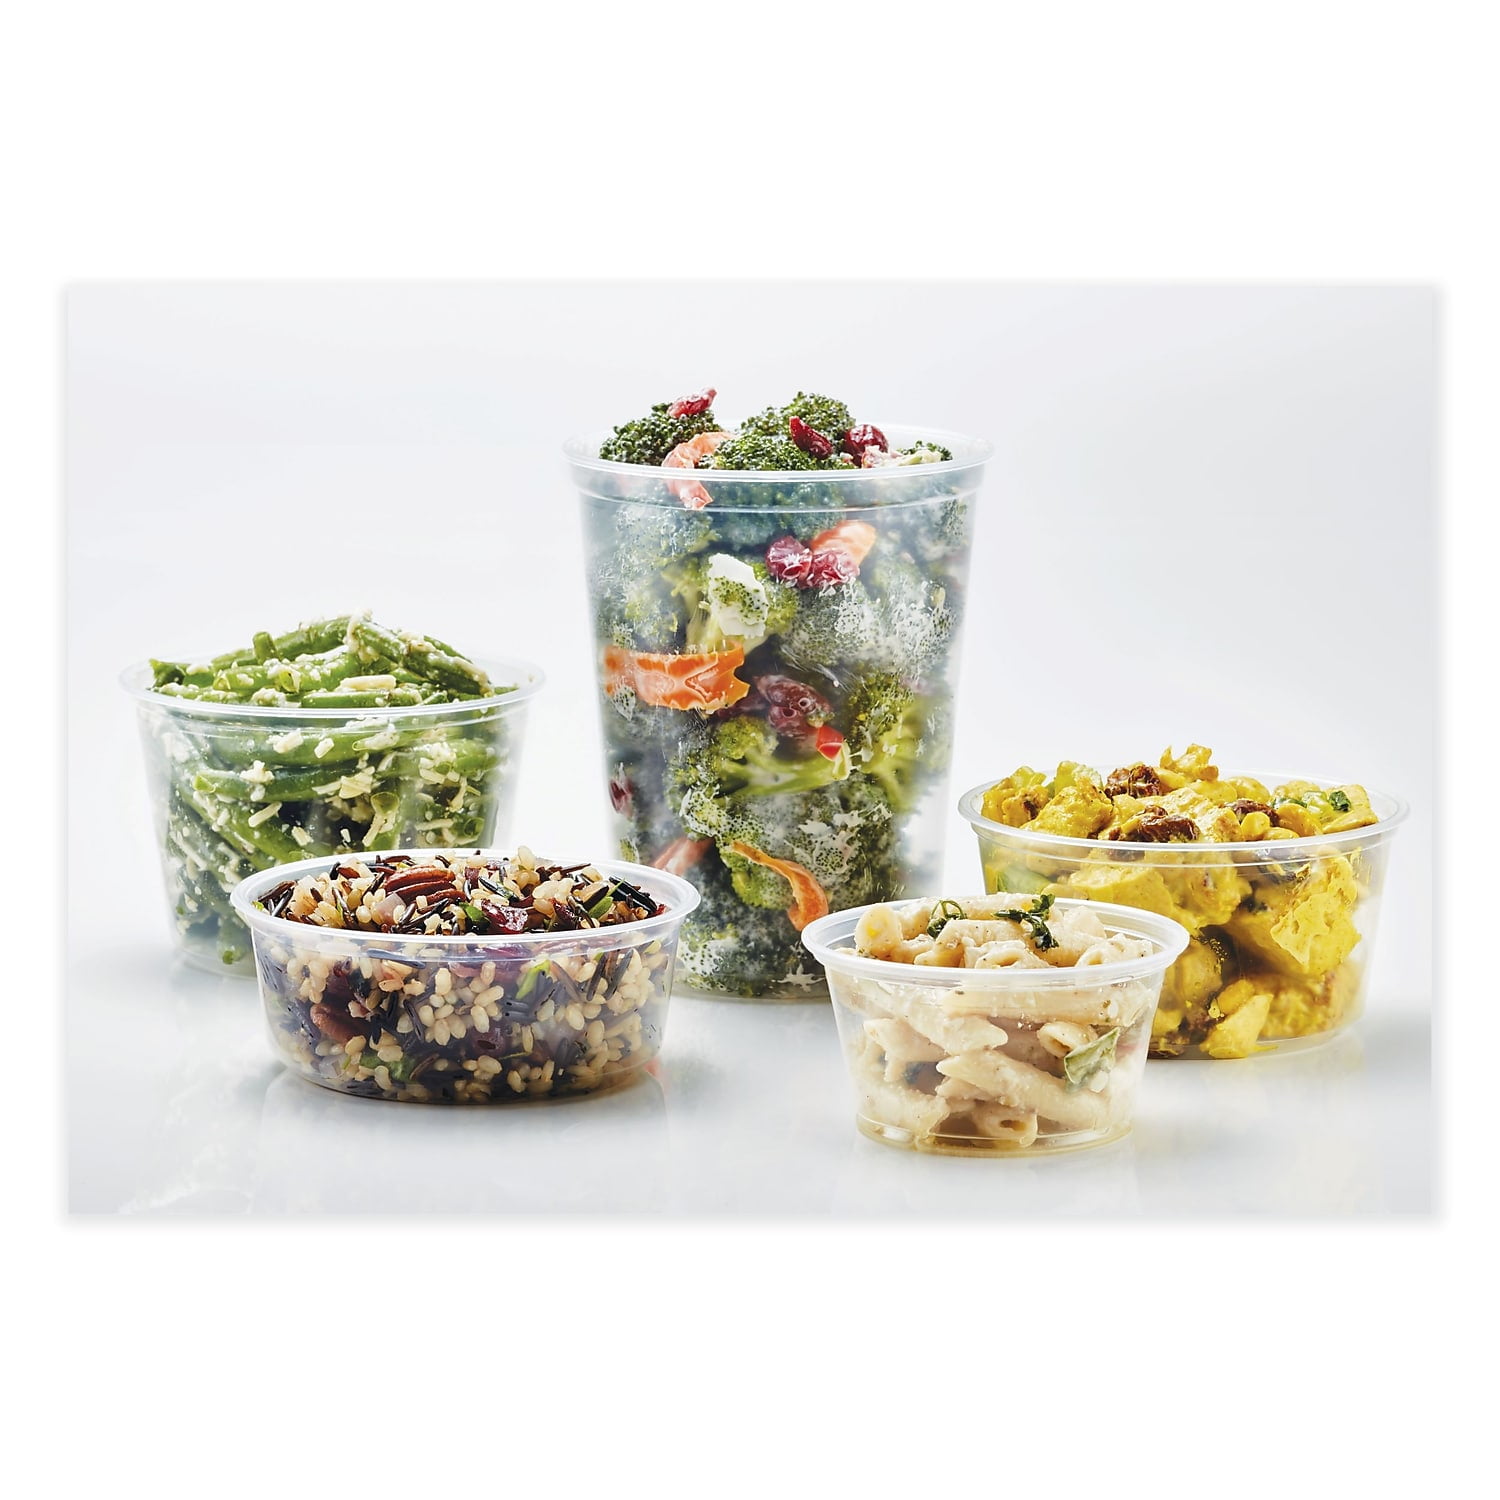 Fabri-Kal Microwavable Deli Containers, 8oz, Clear, 500/Carton